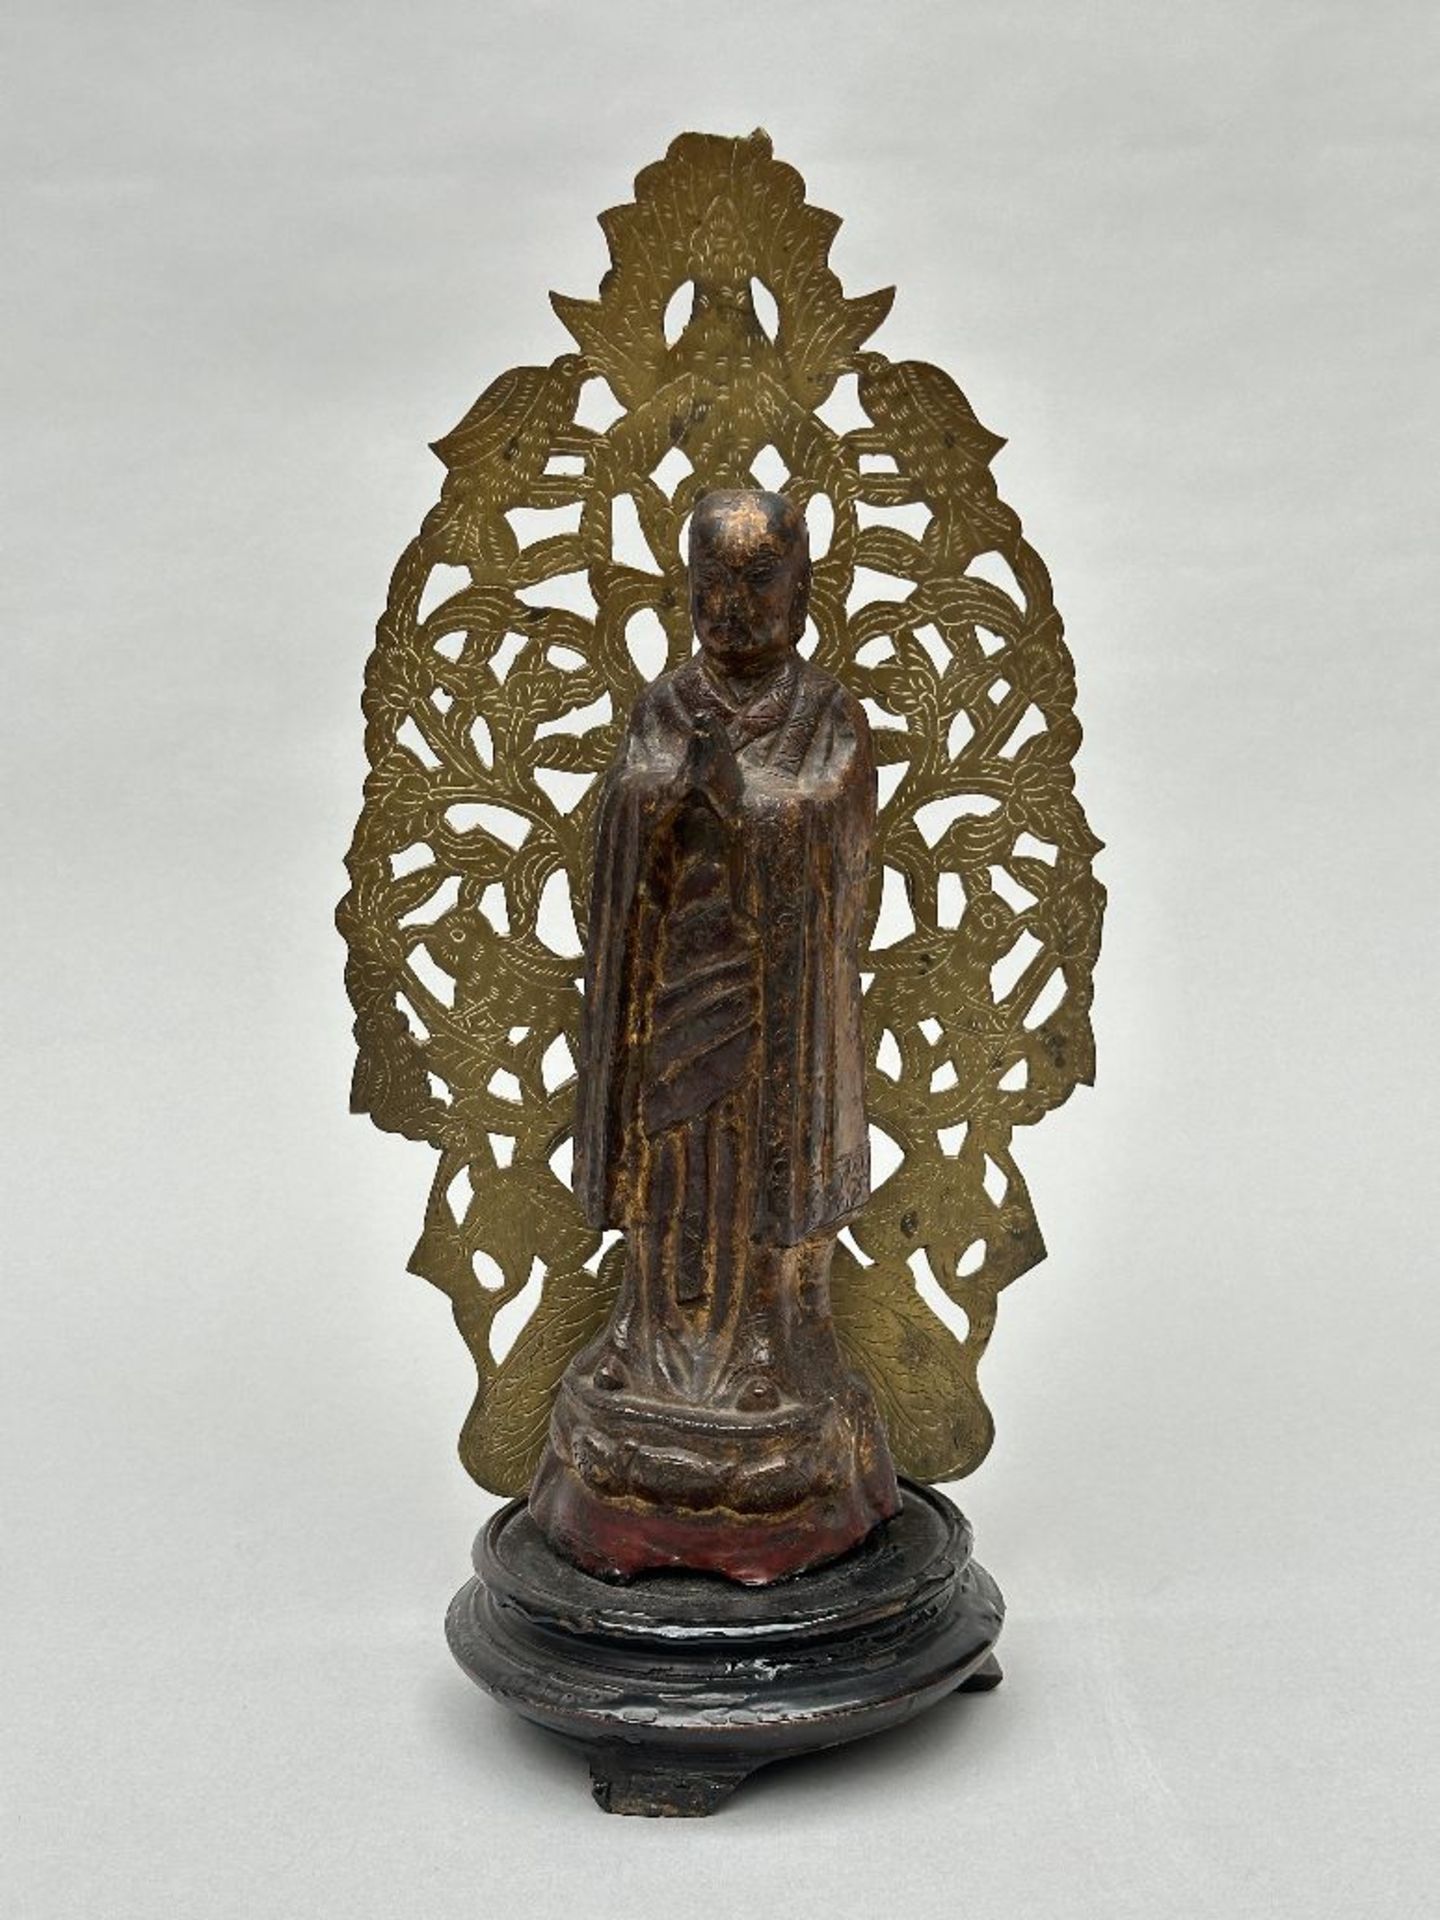 Lacquered bronze statue 'Arhat', late Ming dynasty (mounted on a plinth with copper low relief)